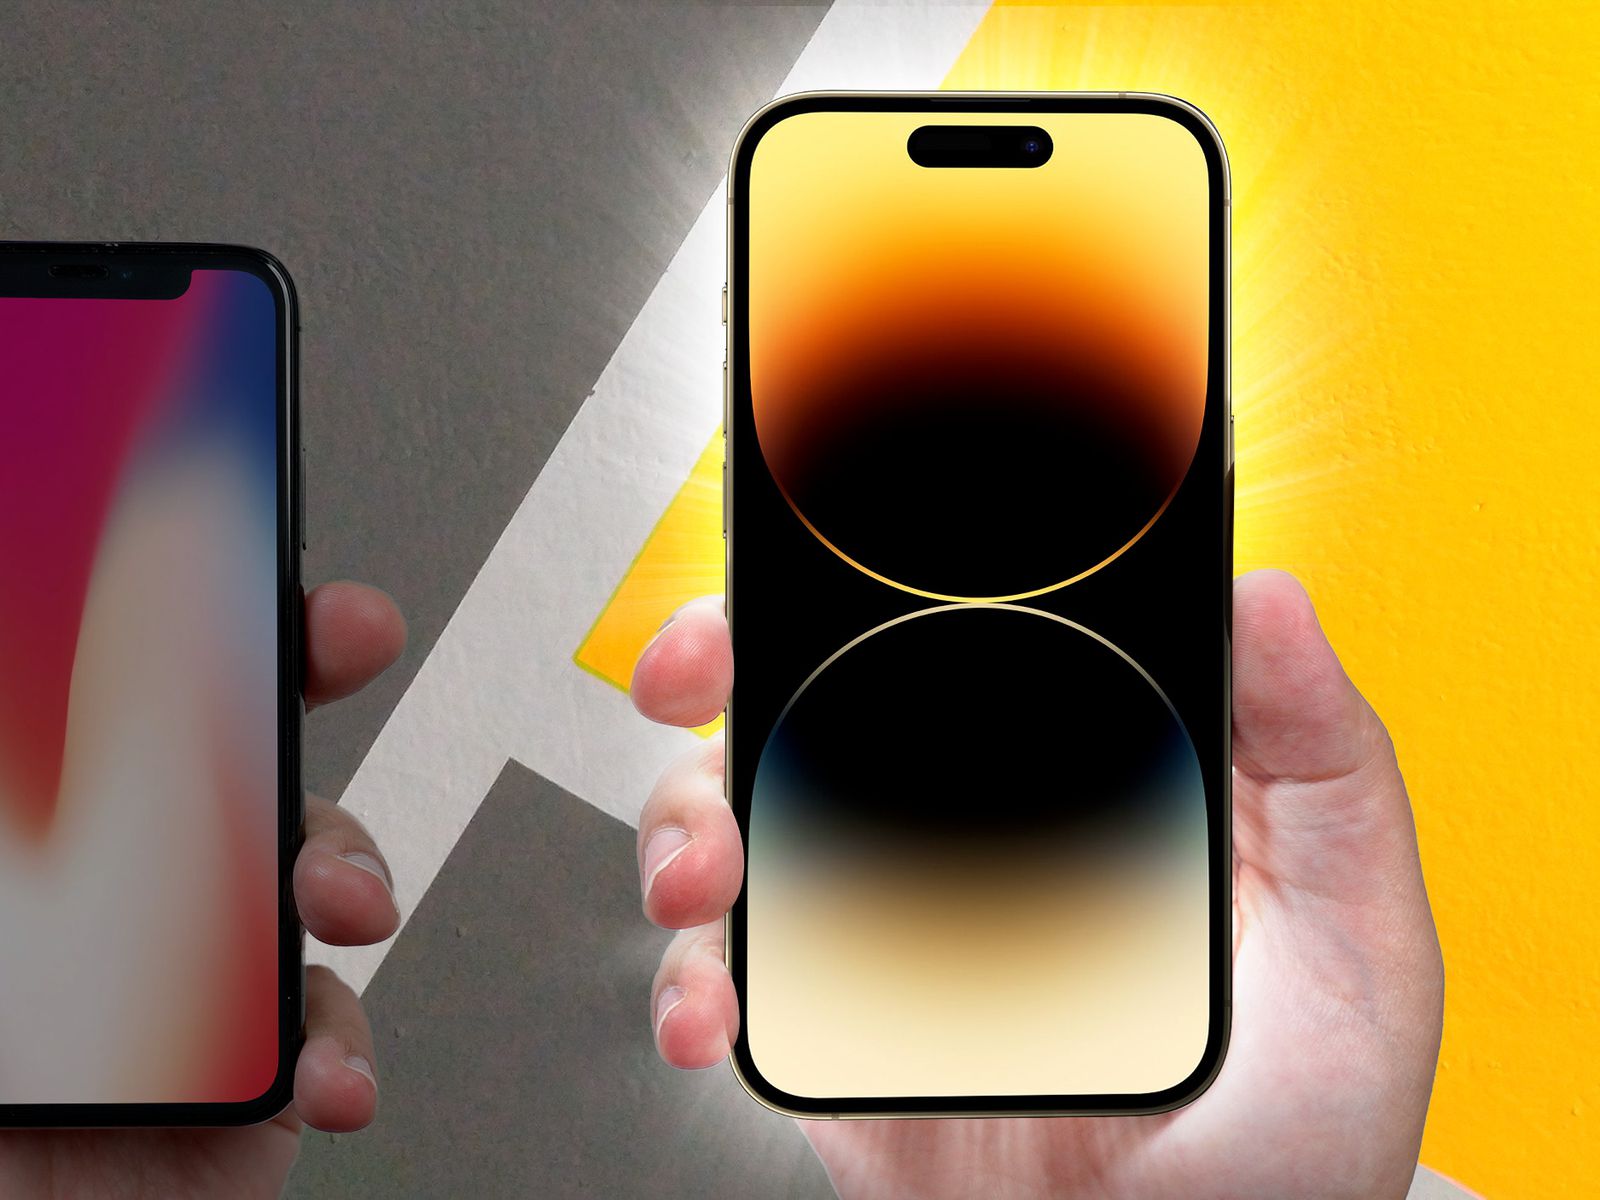 iPhone XS vs iPhone 13: Which one should you buy?